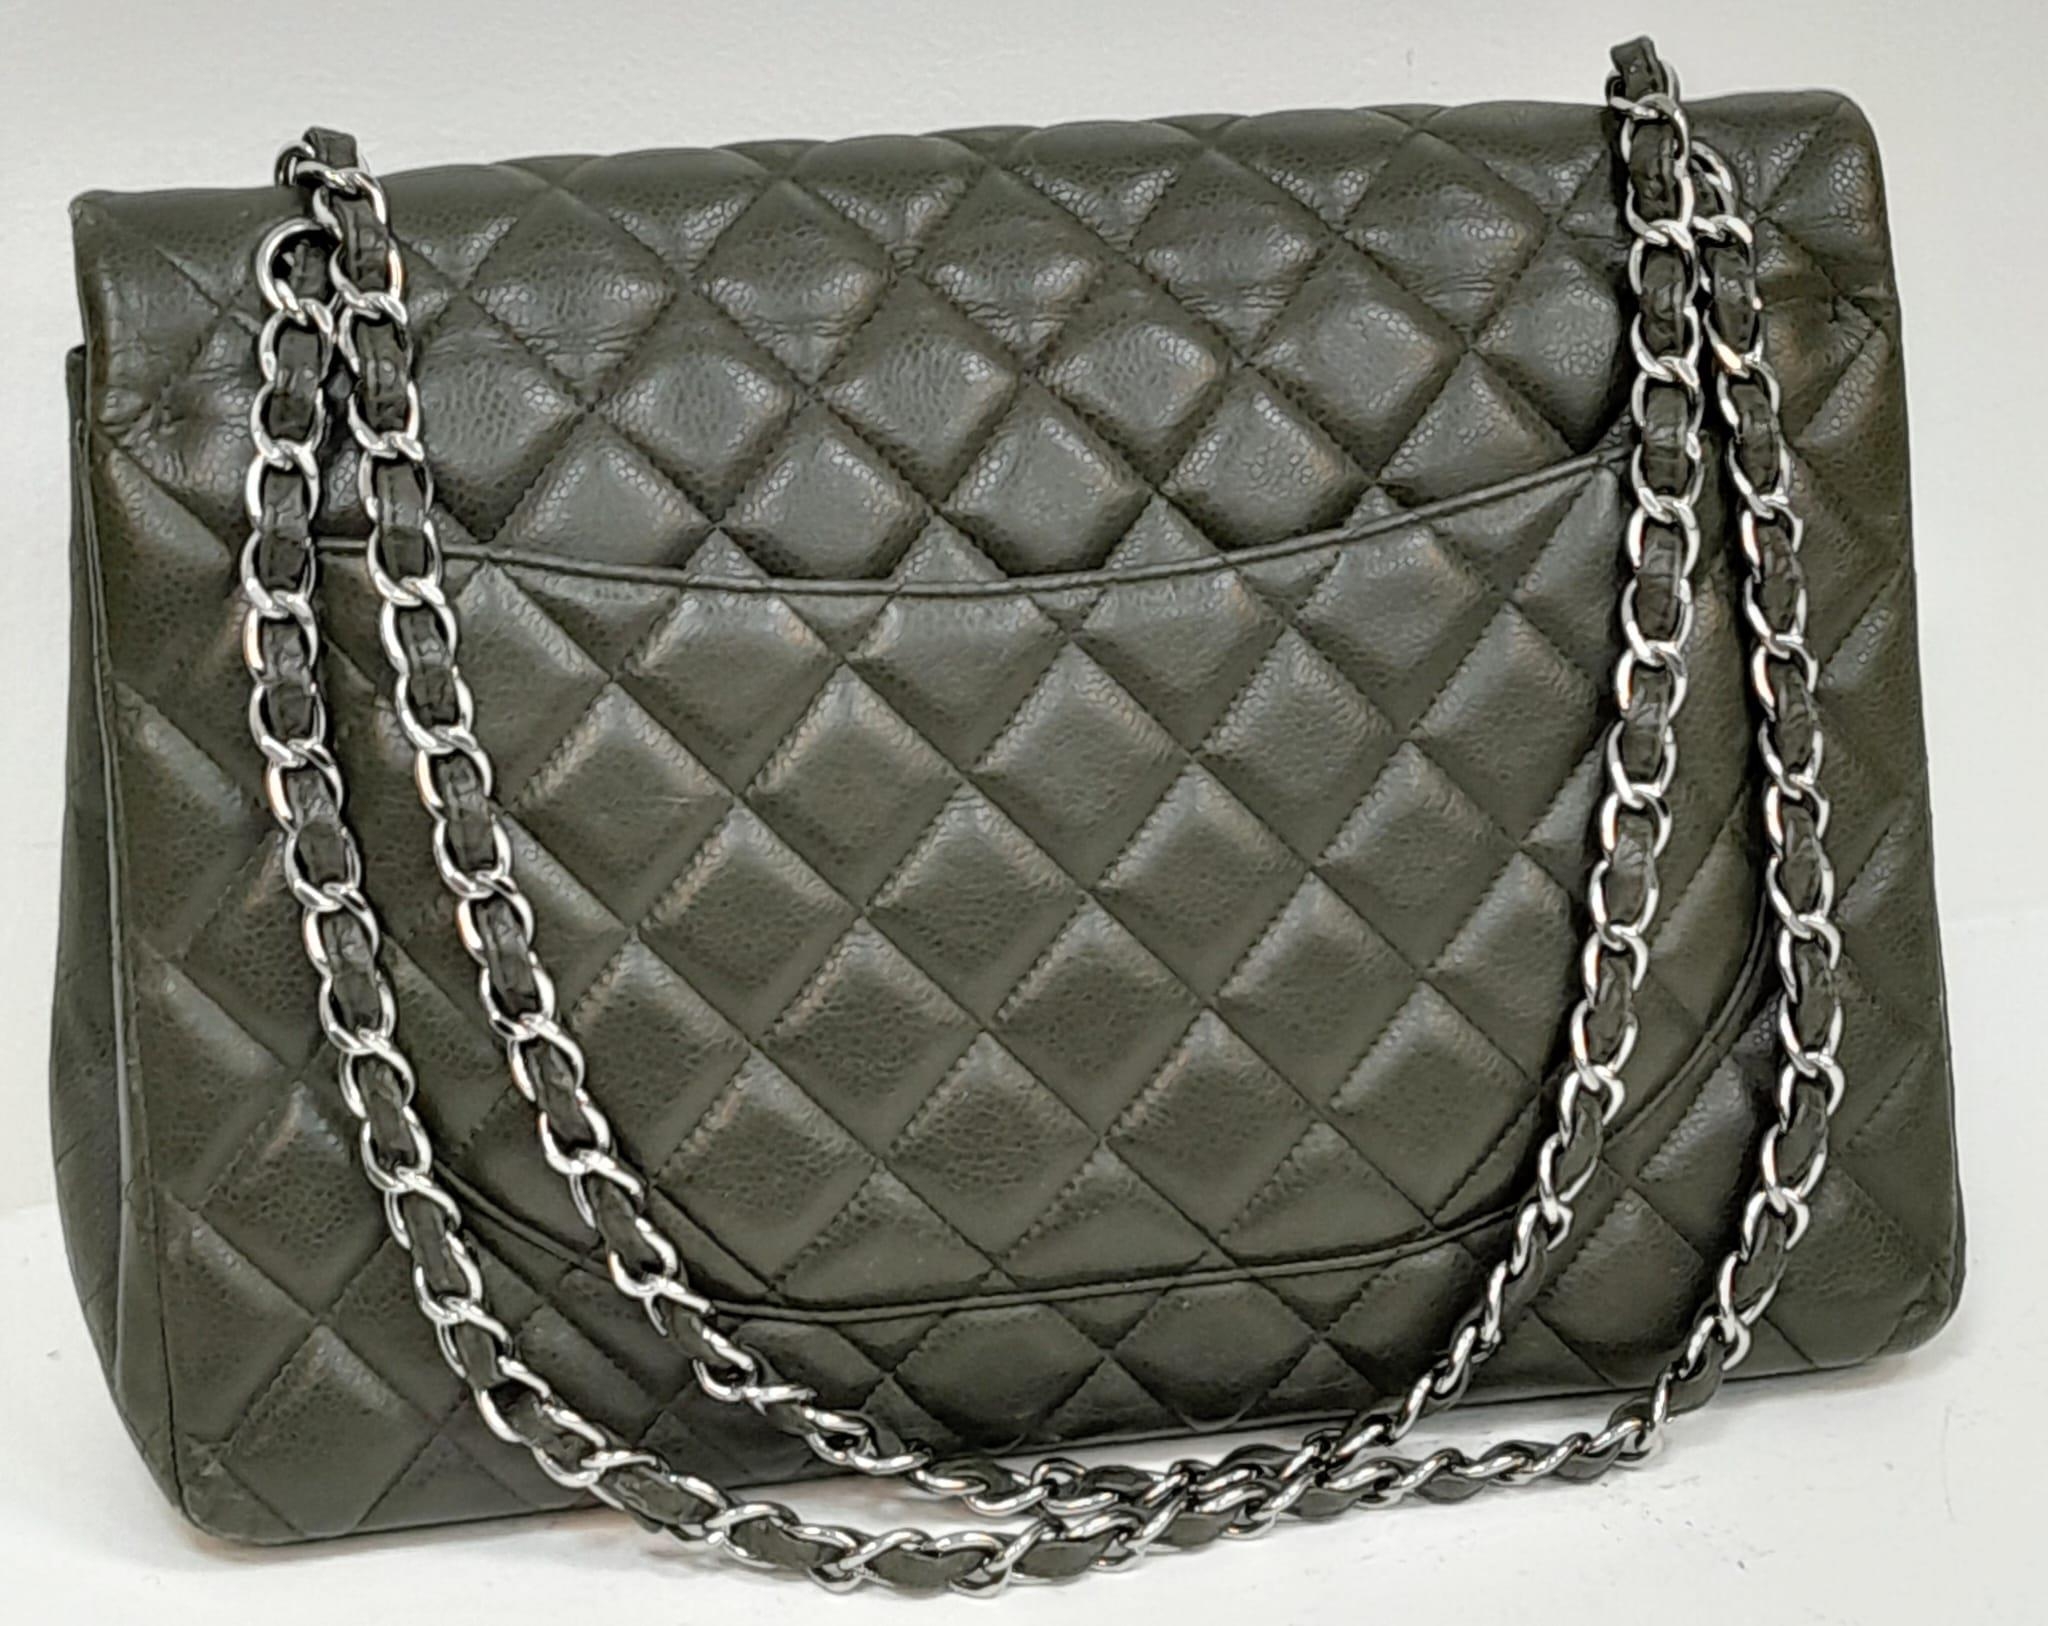 A Chanel Green Jumbo Classic Double Flap Bag. Quilted leather exterior with silver-toned hardware, - Image 8 of 14